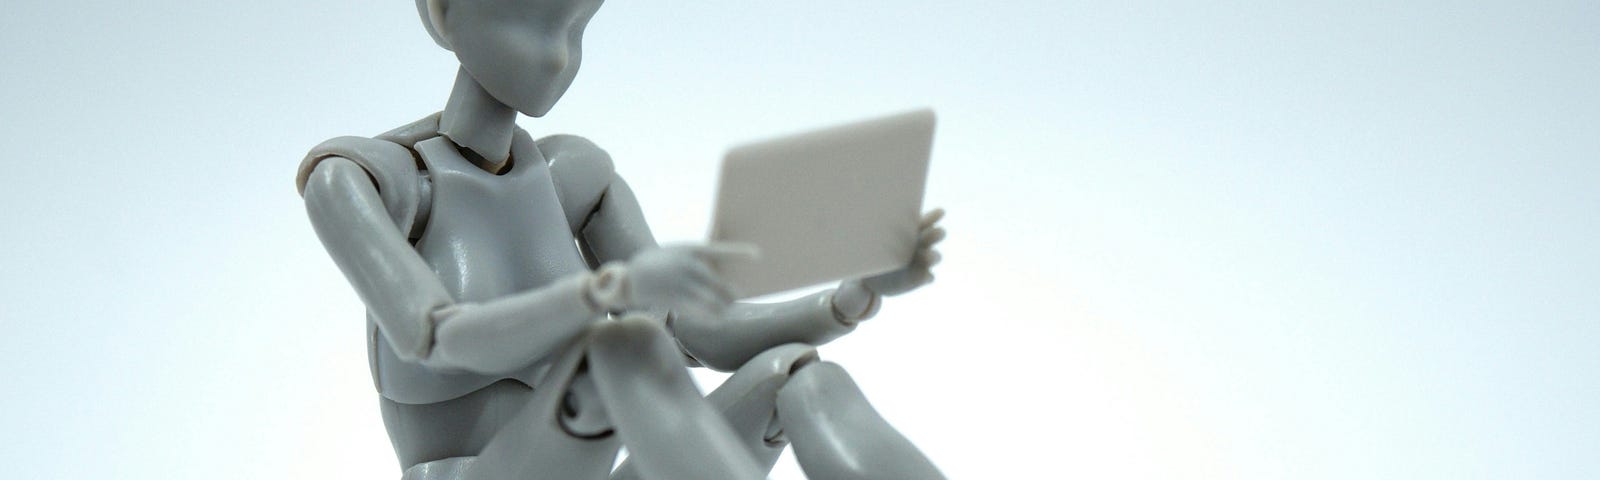 A robotic-looking plastic figure sitting on the floor holding a tablet.